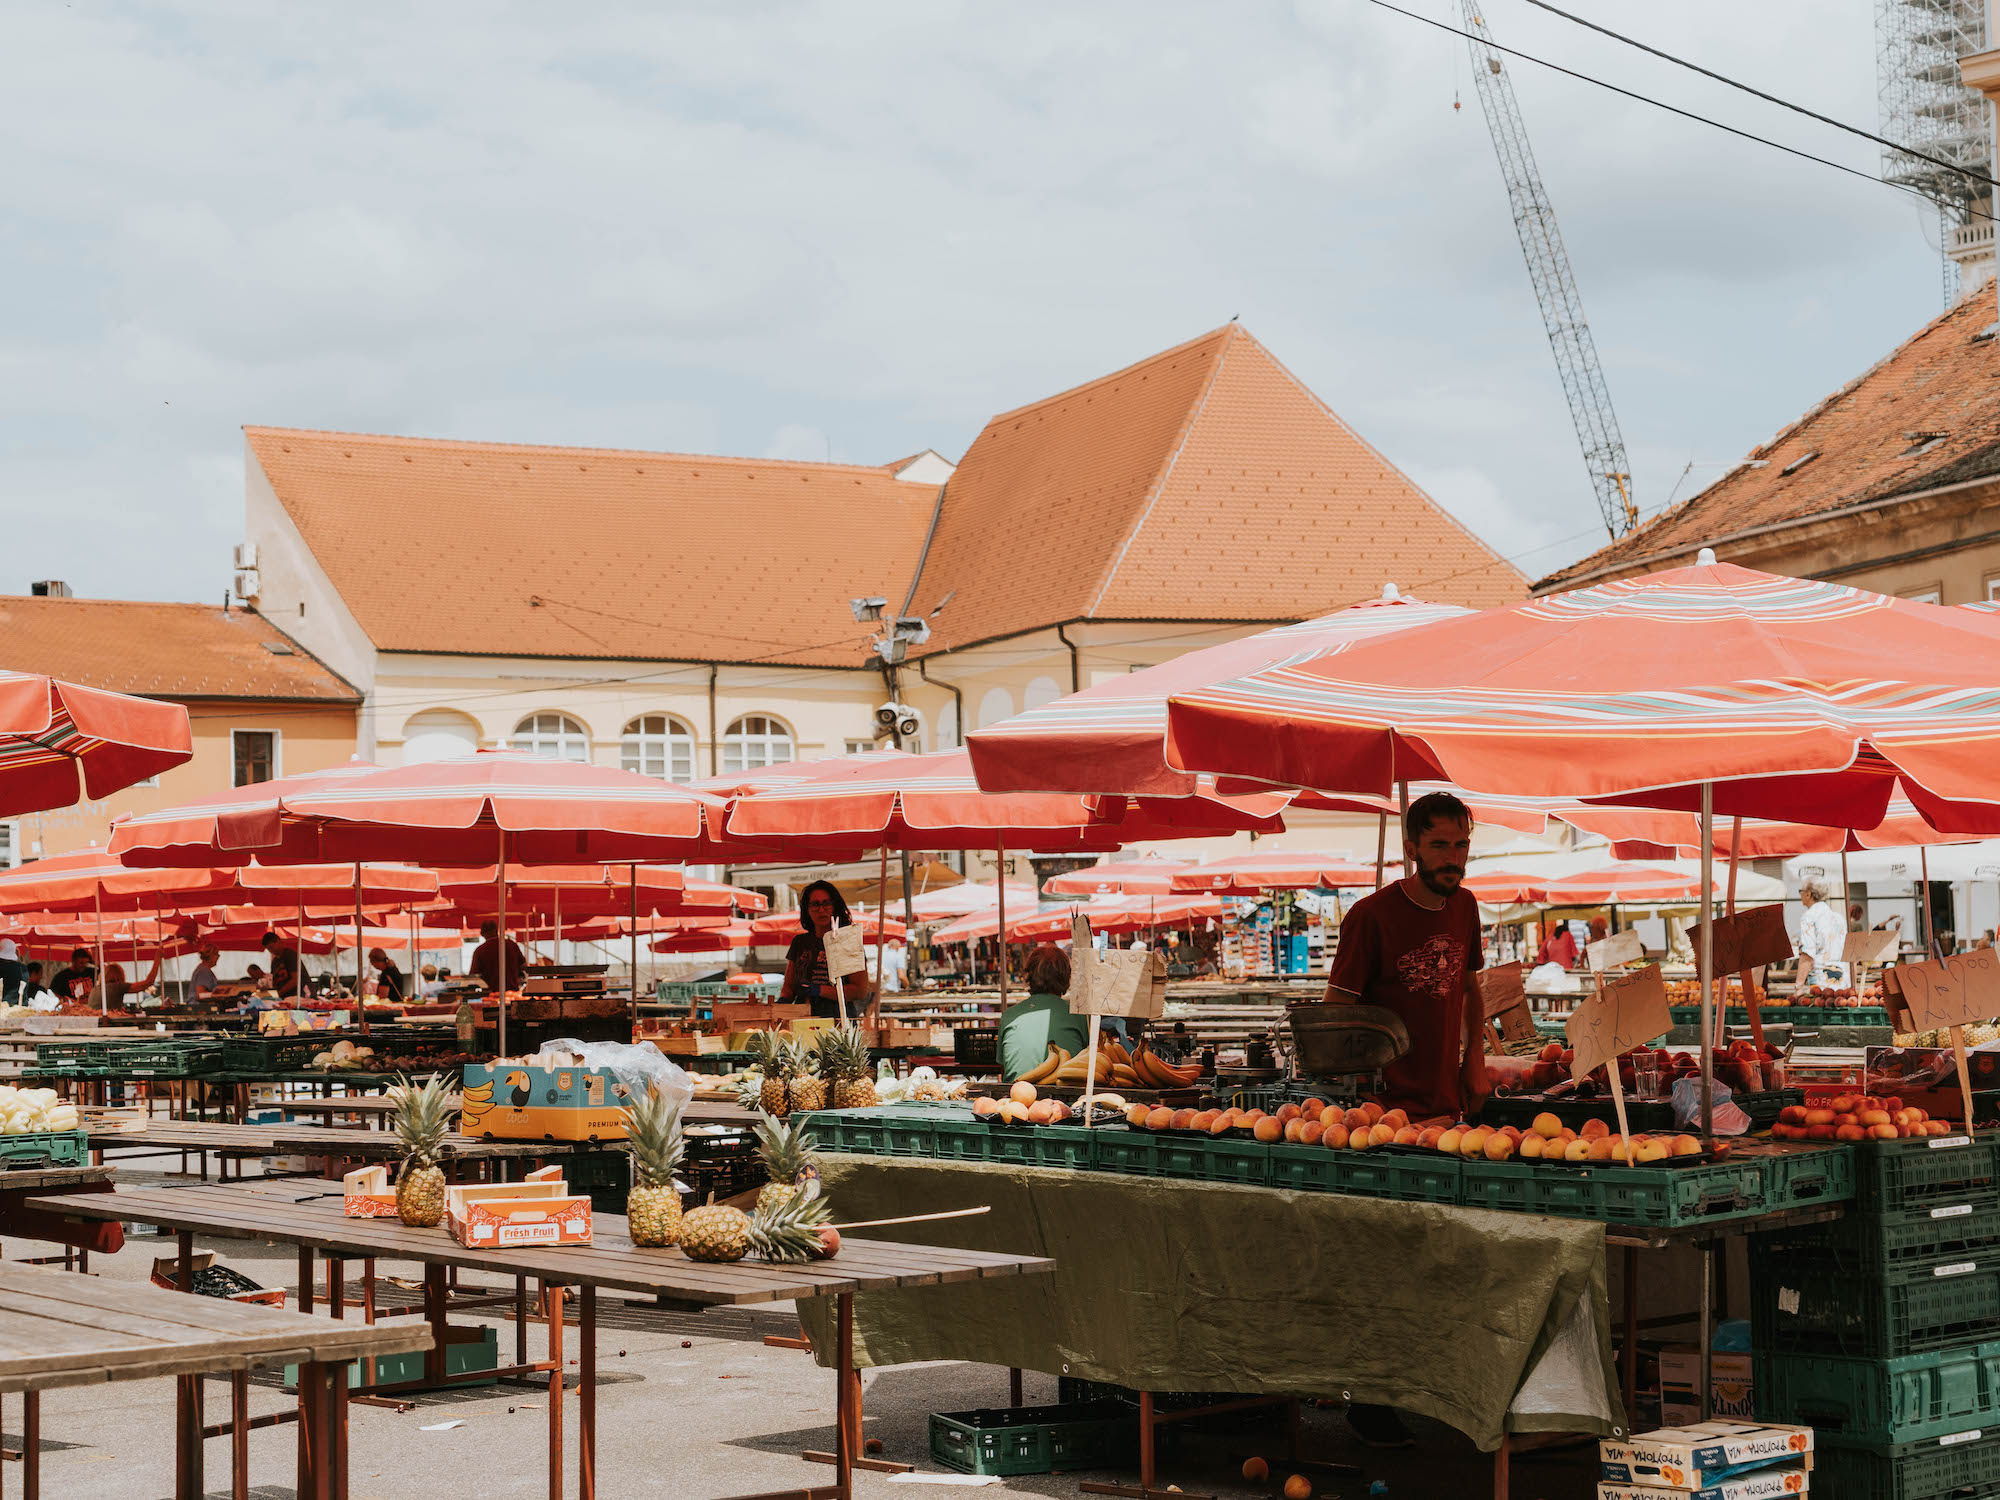 Zagreb’s iconic Dolac Market is a must-visit destination for fresh produce, local delicacies, and authentic Croatian products